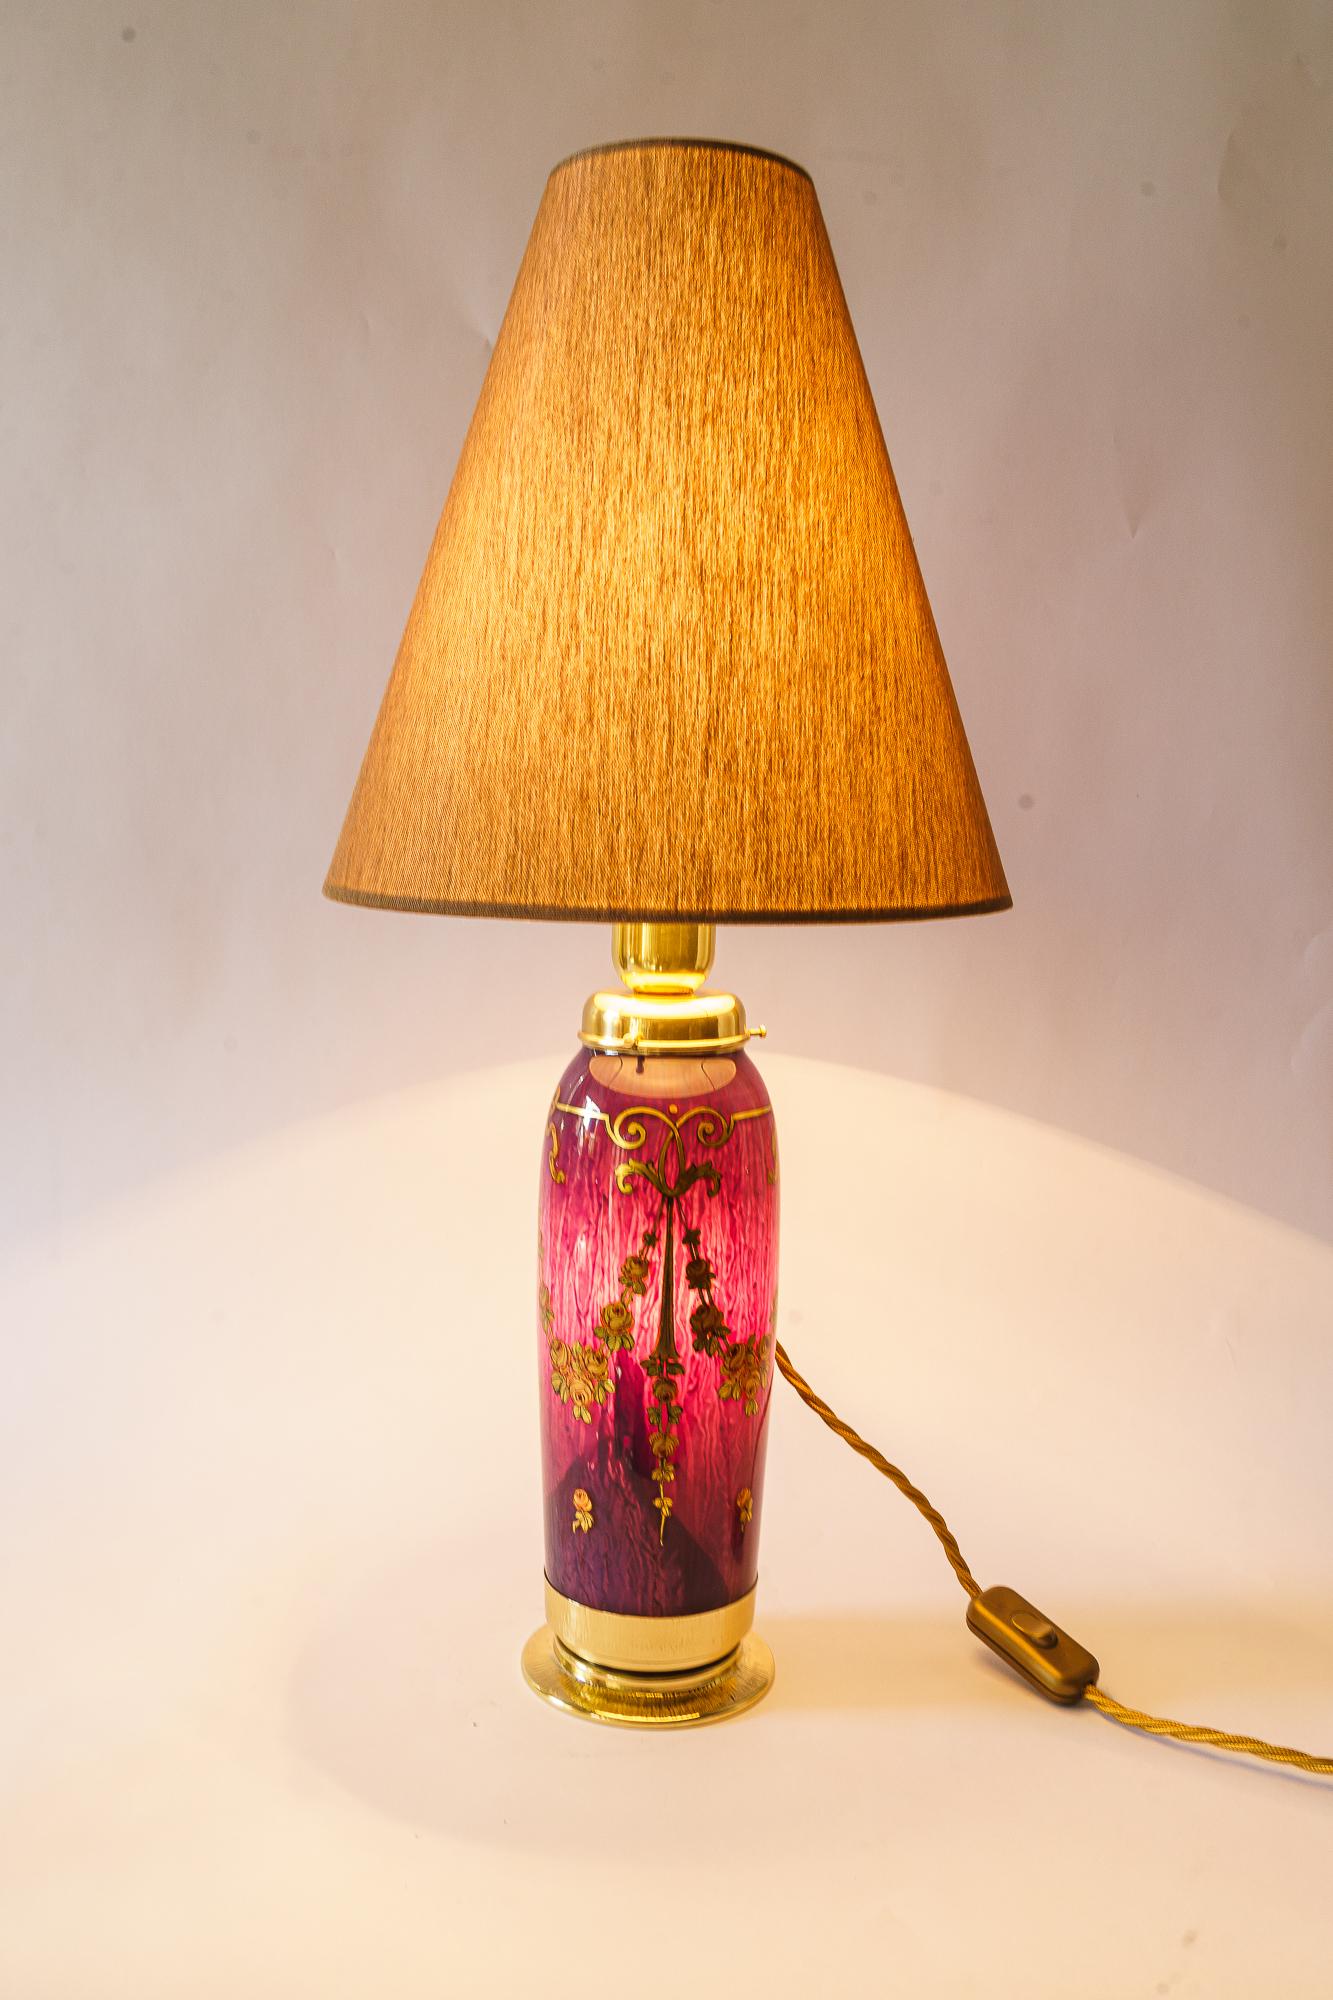 Rare Art Deco Glass Table Lamp with Fabric Shade, Vienna, Around 1920s  For Sale 1